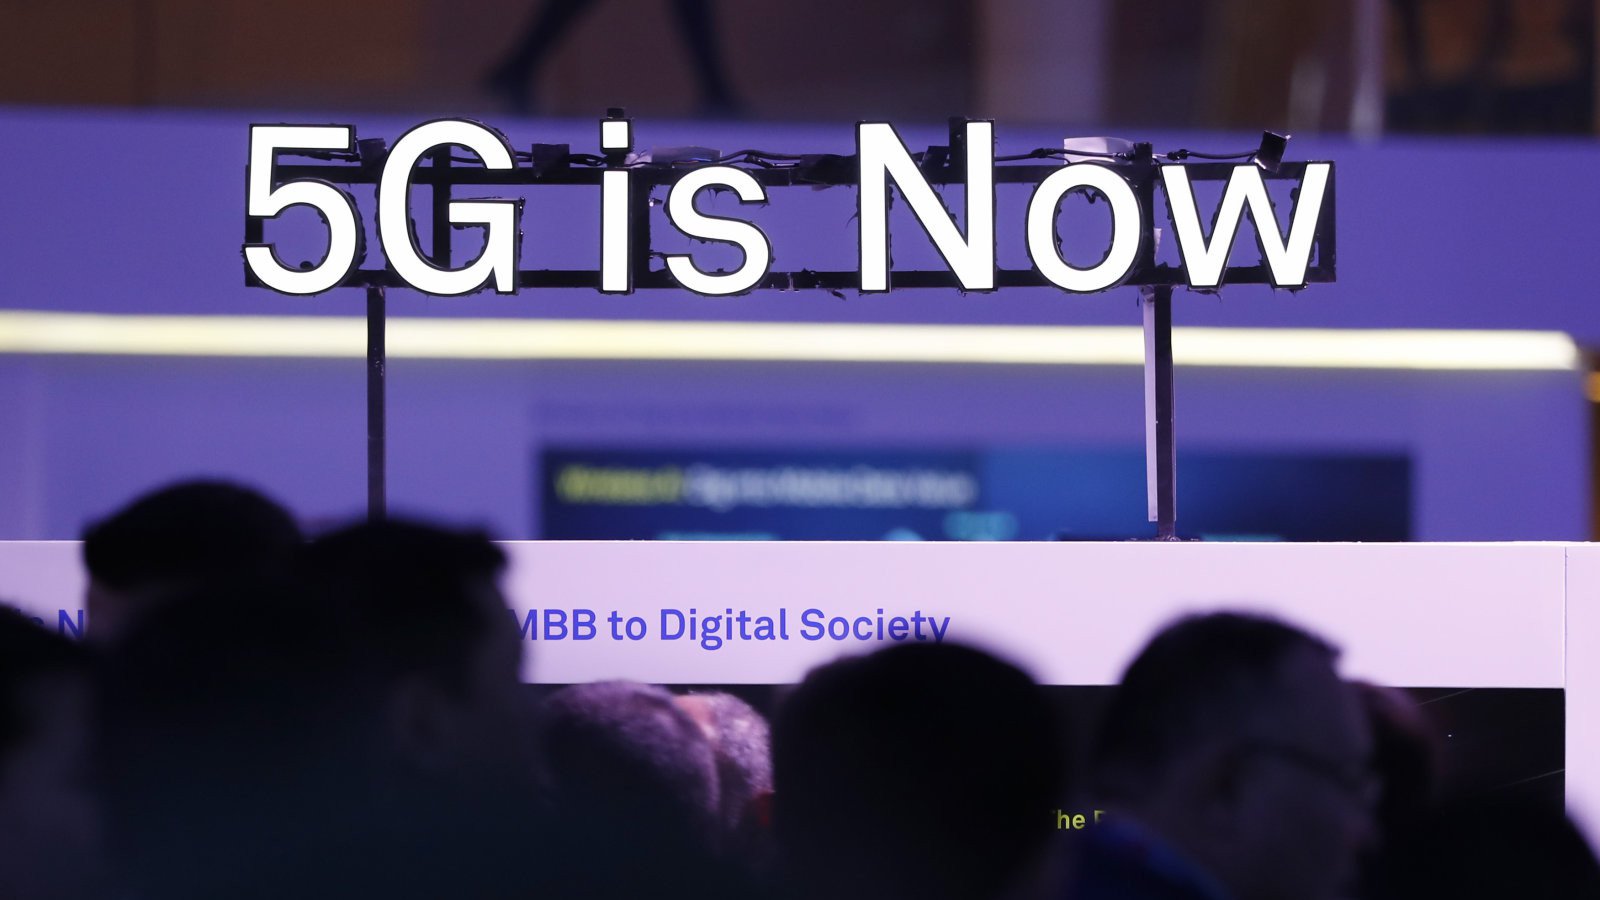 5G-phones at MWC 2019 — what is the difference between Samsung and LG